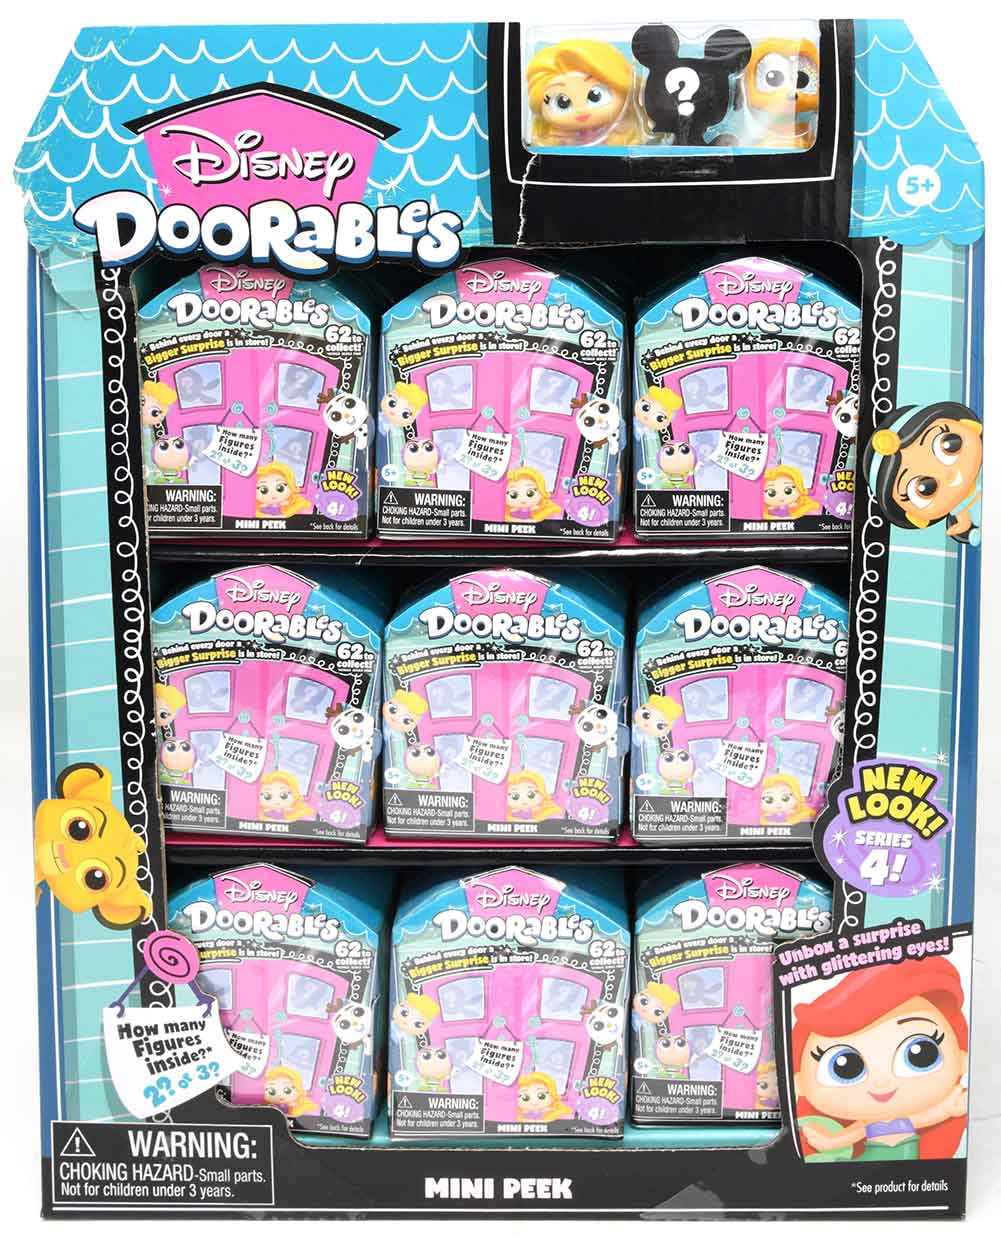 Special Edition! Disney Doorables Series 4 Dory Brand New